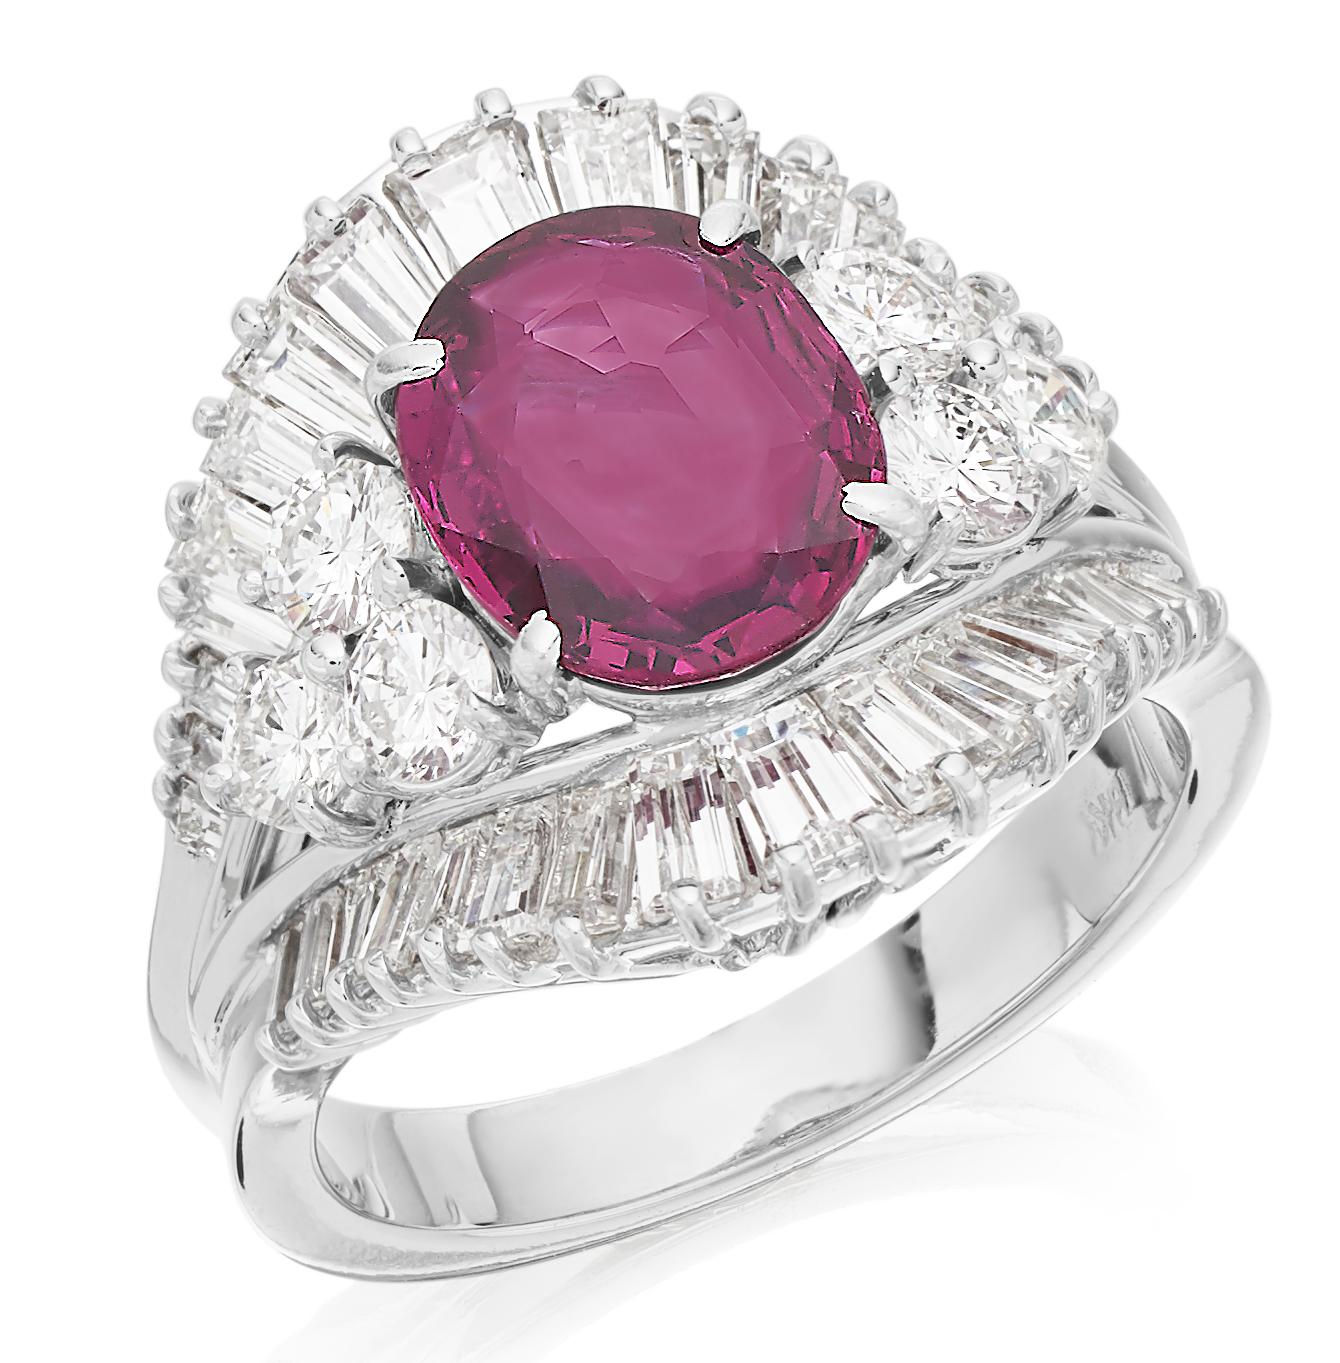 Gorgeous ruby and diamond ring in 18K white gold, centering a stunning oval cut deep red ruby with 3 round brilliant diamonds on the both sides, all bordered by two crowns, above and below of baguette cut diamonds all on a unique arrowhead band.
1 x